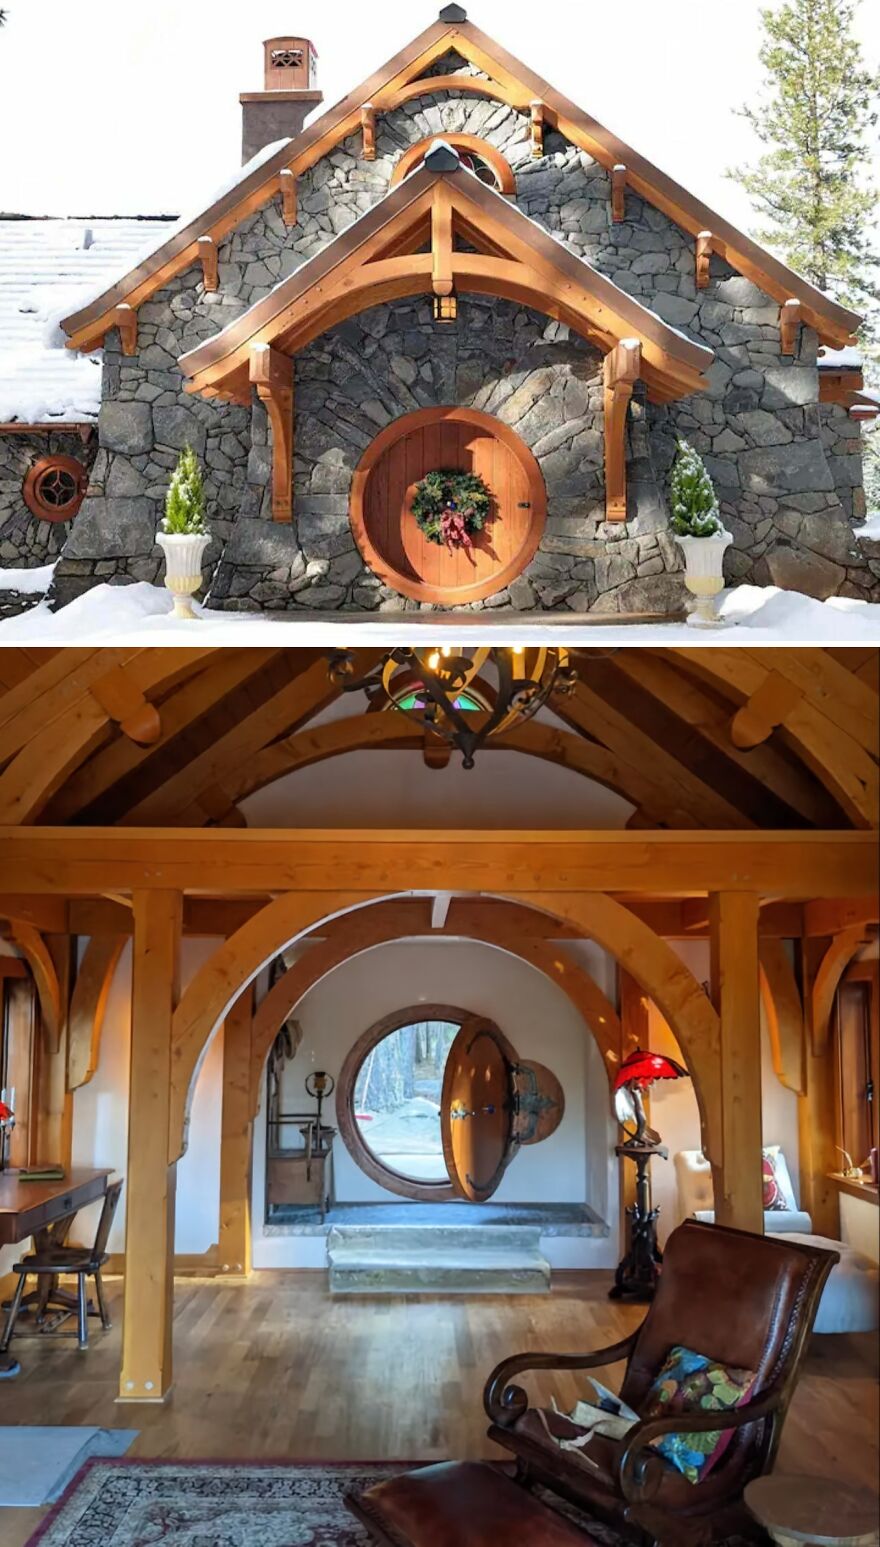 This Real Life Hobbit House Is Amazing